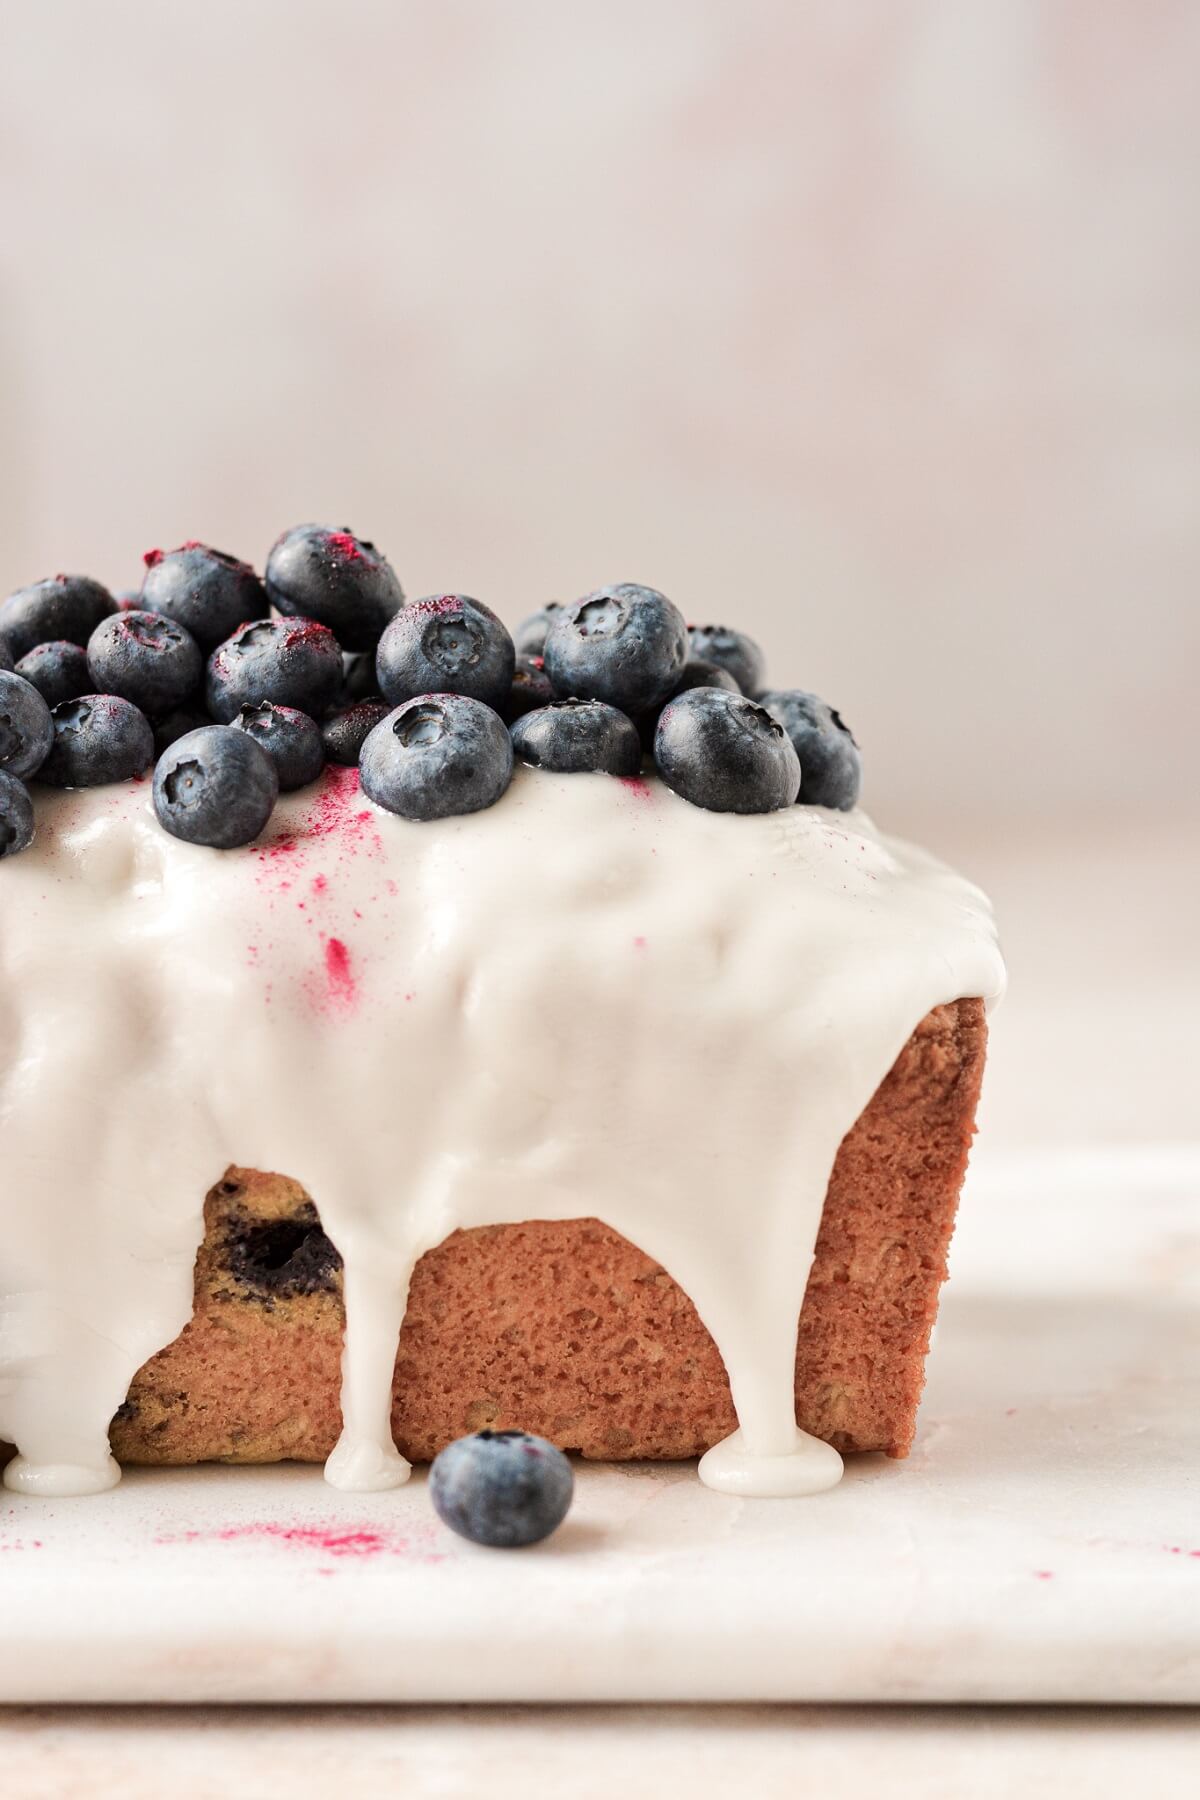 Lemon blueberry loaf cake with lemon icing and fresh blueberries on top.